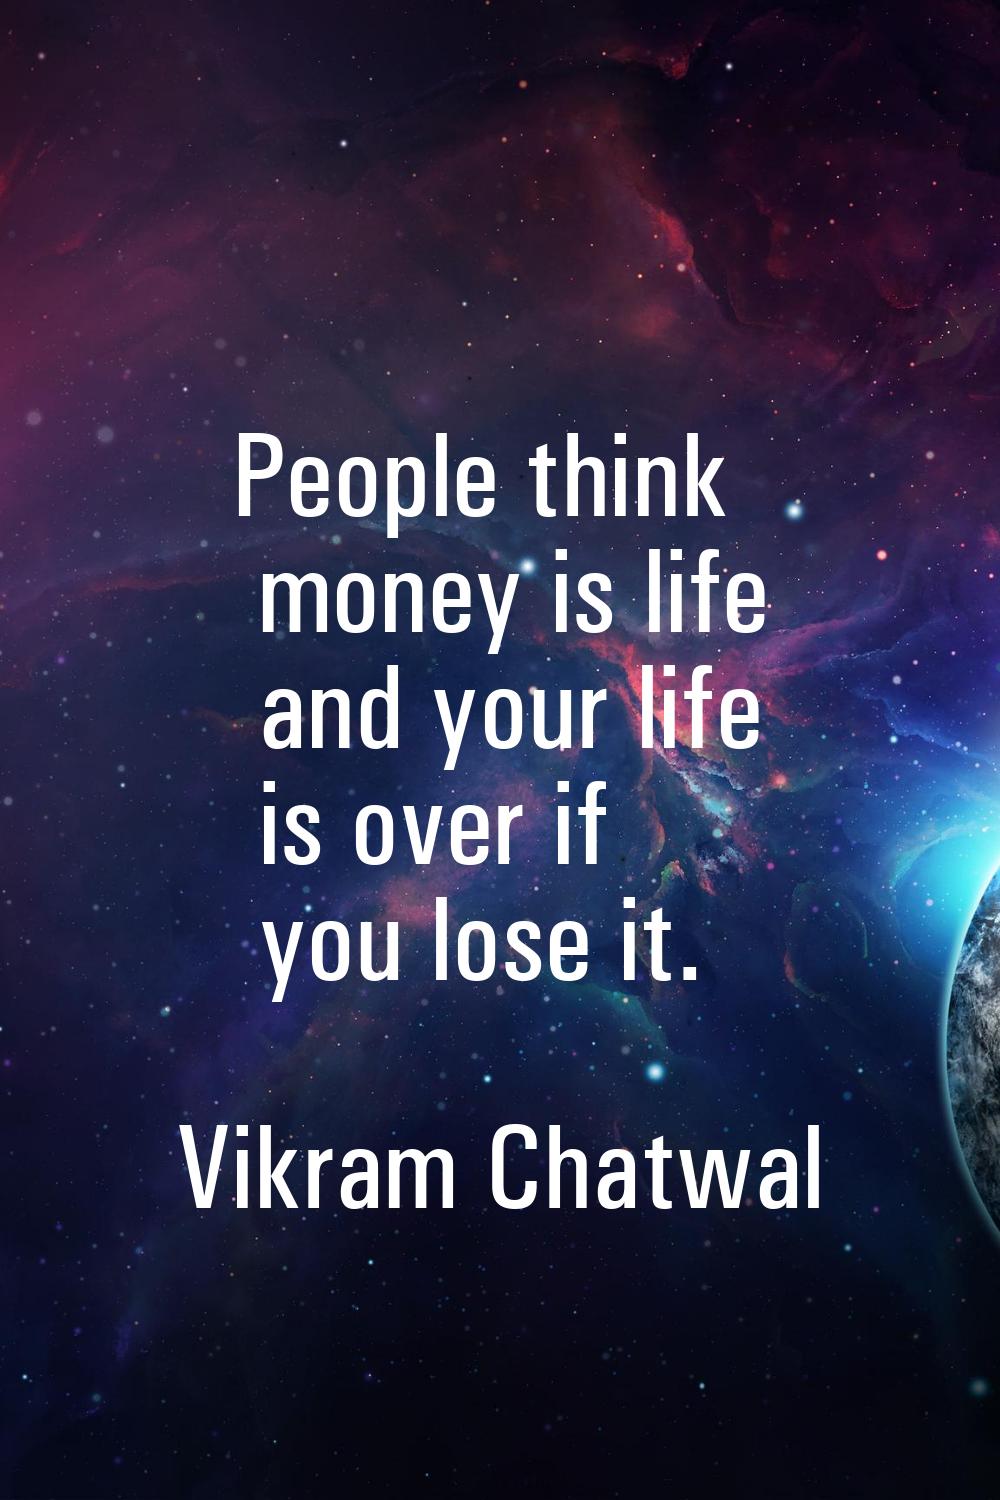 People think money is life and your life is over if you lose it.